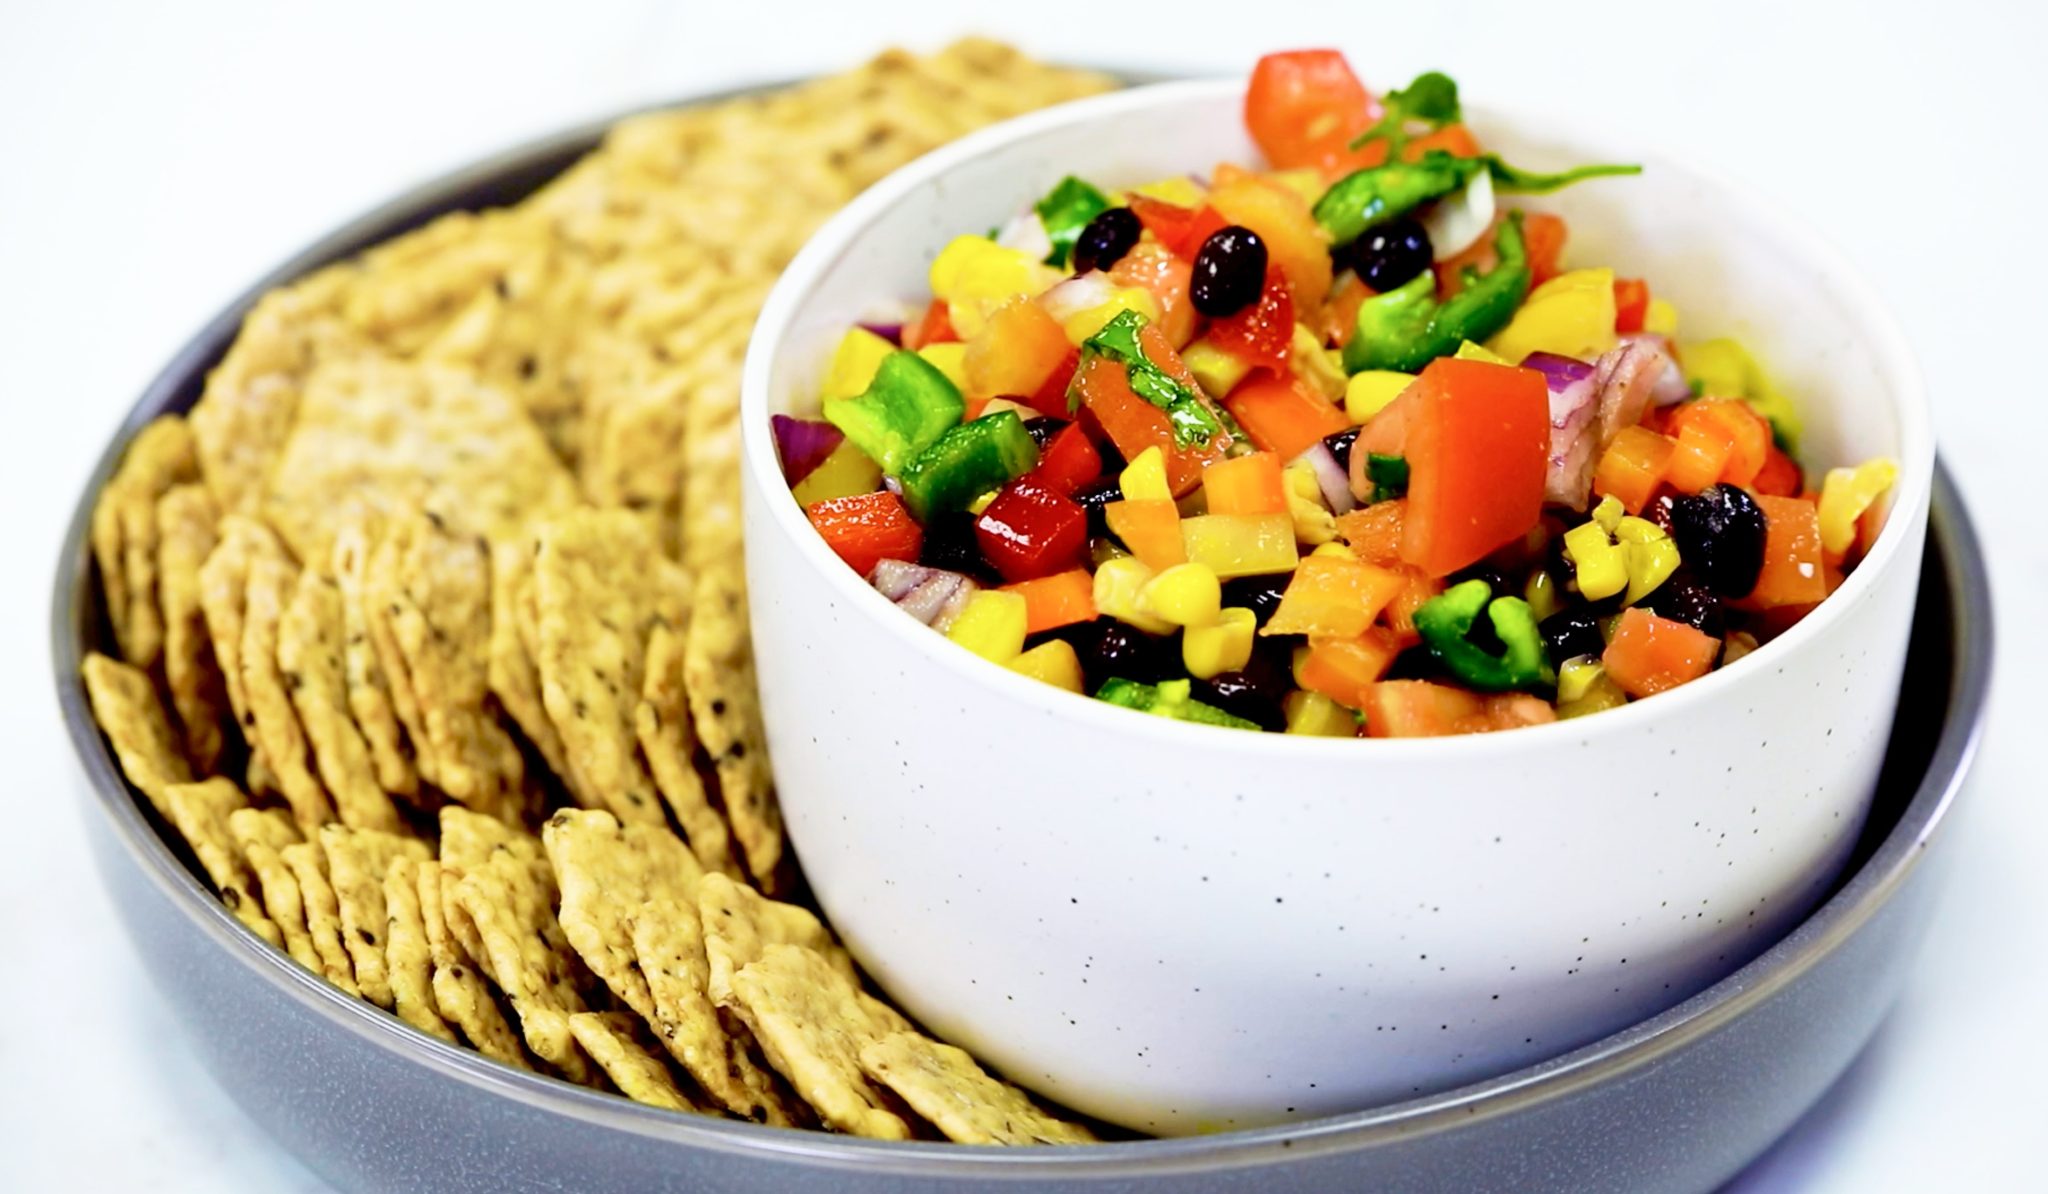 Fiesta Confetti, mixed vegetables in white bowl, crackers